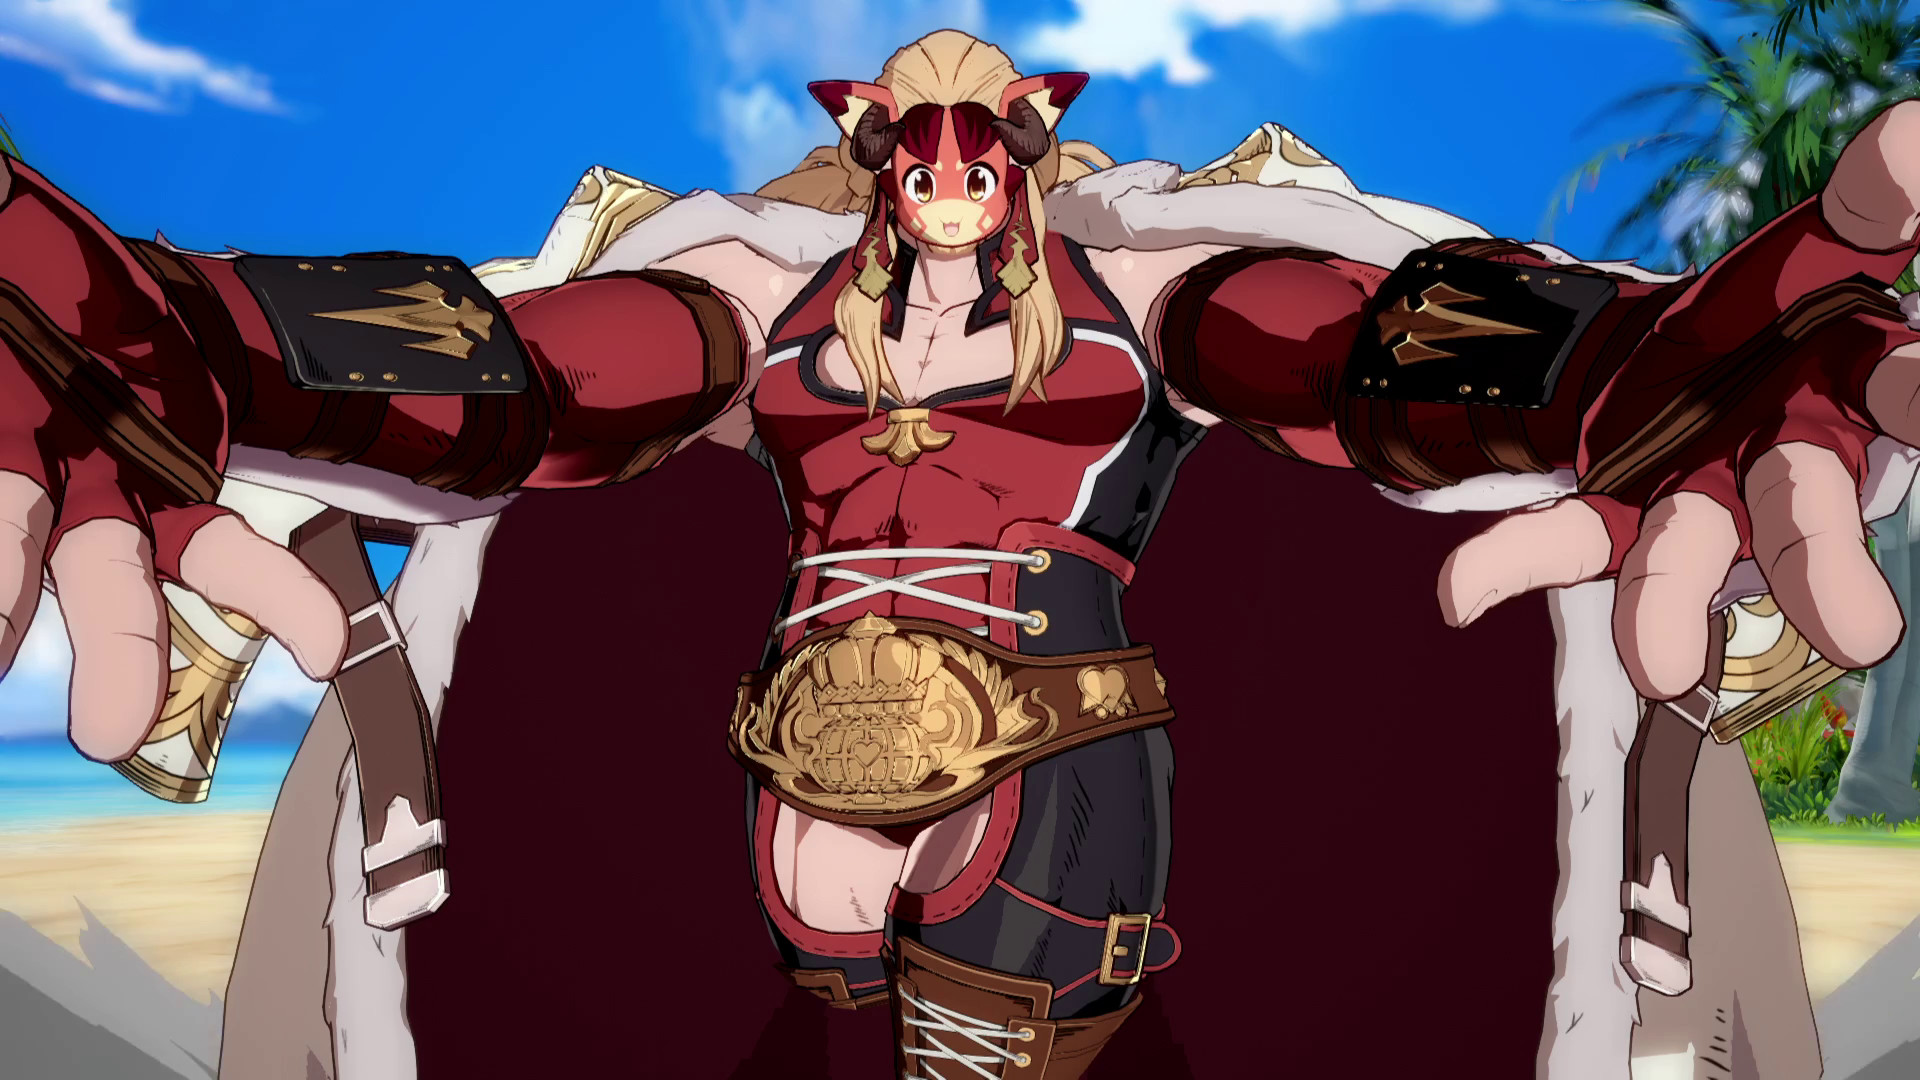 Granblue Fantasy Versus Introduces New Character Ladiva - Game Informer